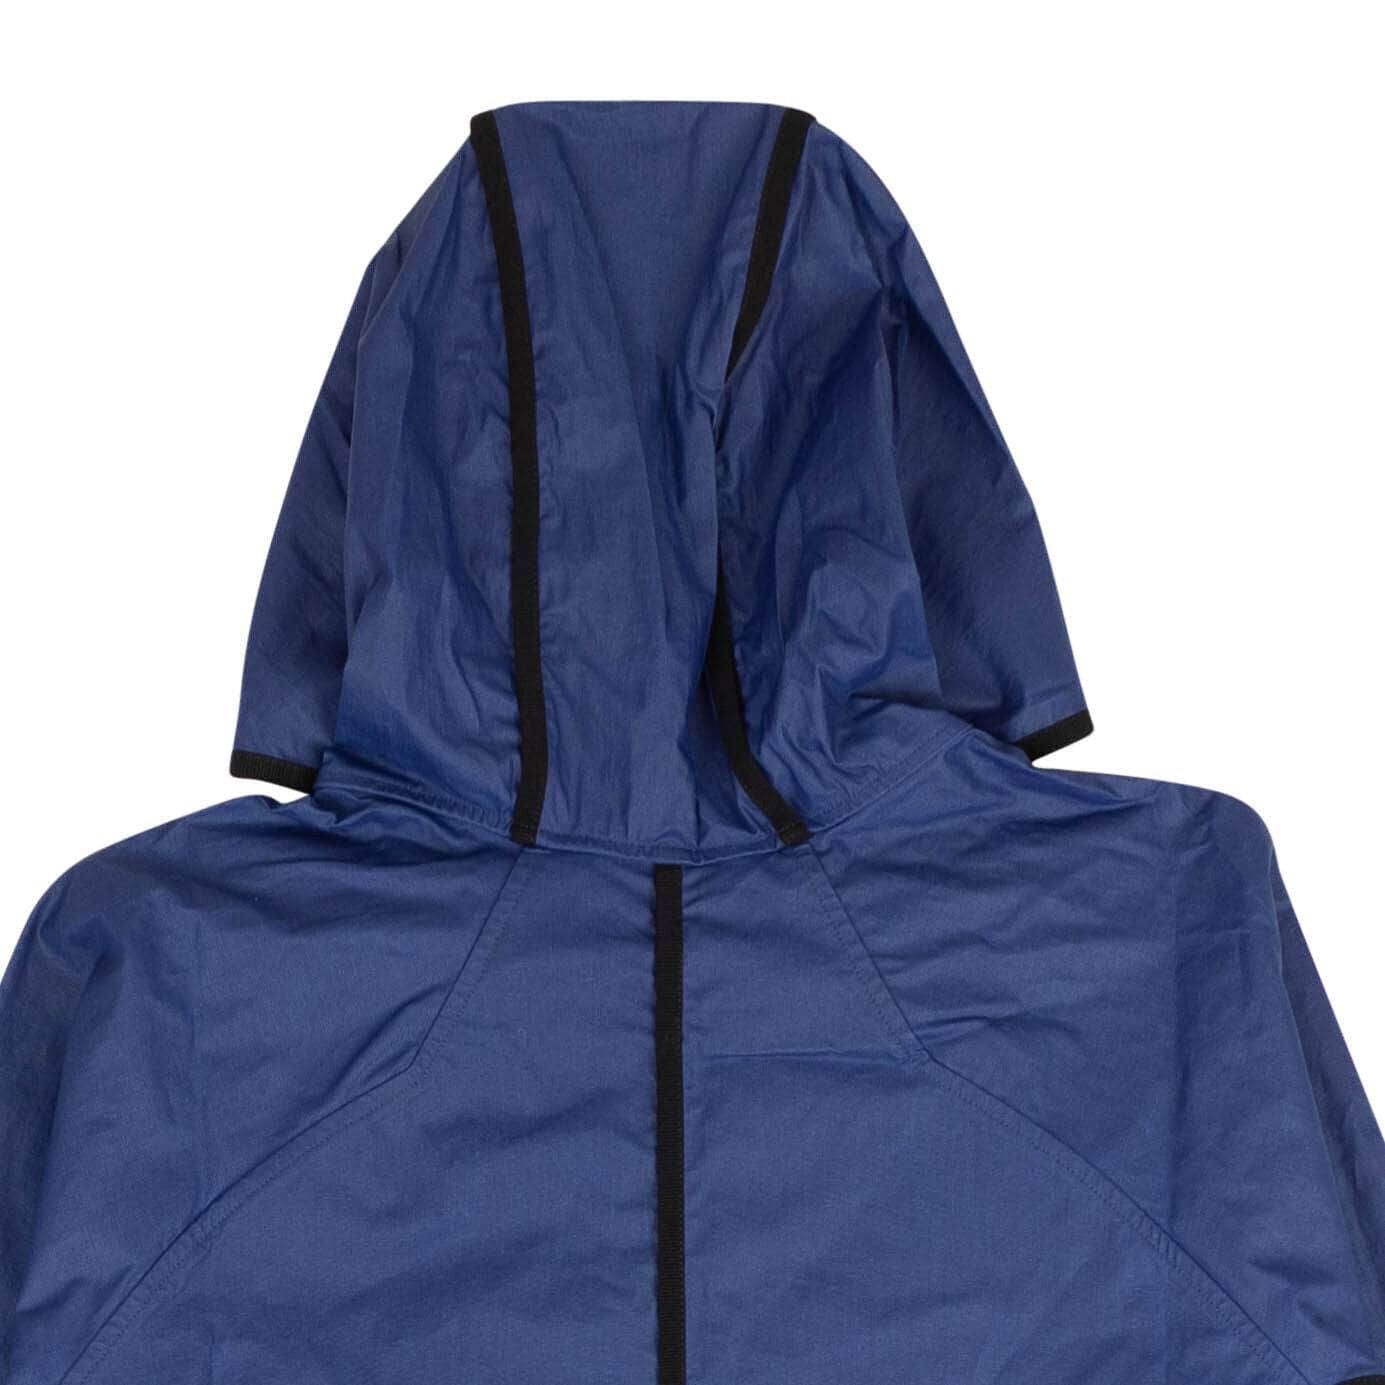 Byborre 250-500, byborre, channelenable-all, chicmi, couponcollection, gender-mens, main-clothing, mens-shoes, mens-track-jackets, MixedApparel, size-l, size-m, size-s, size-xl Blue G5 Hooded Jacket